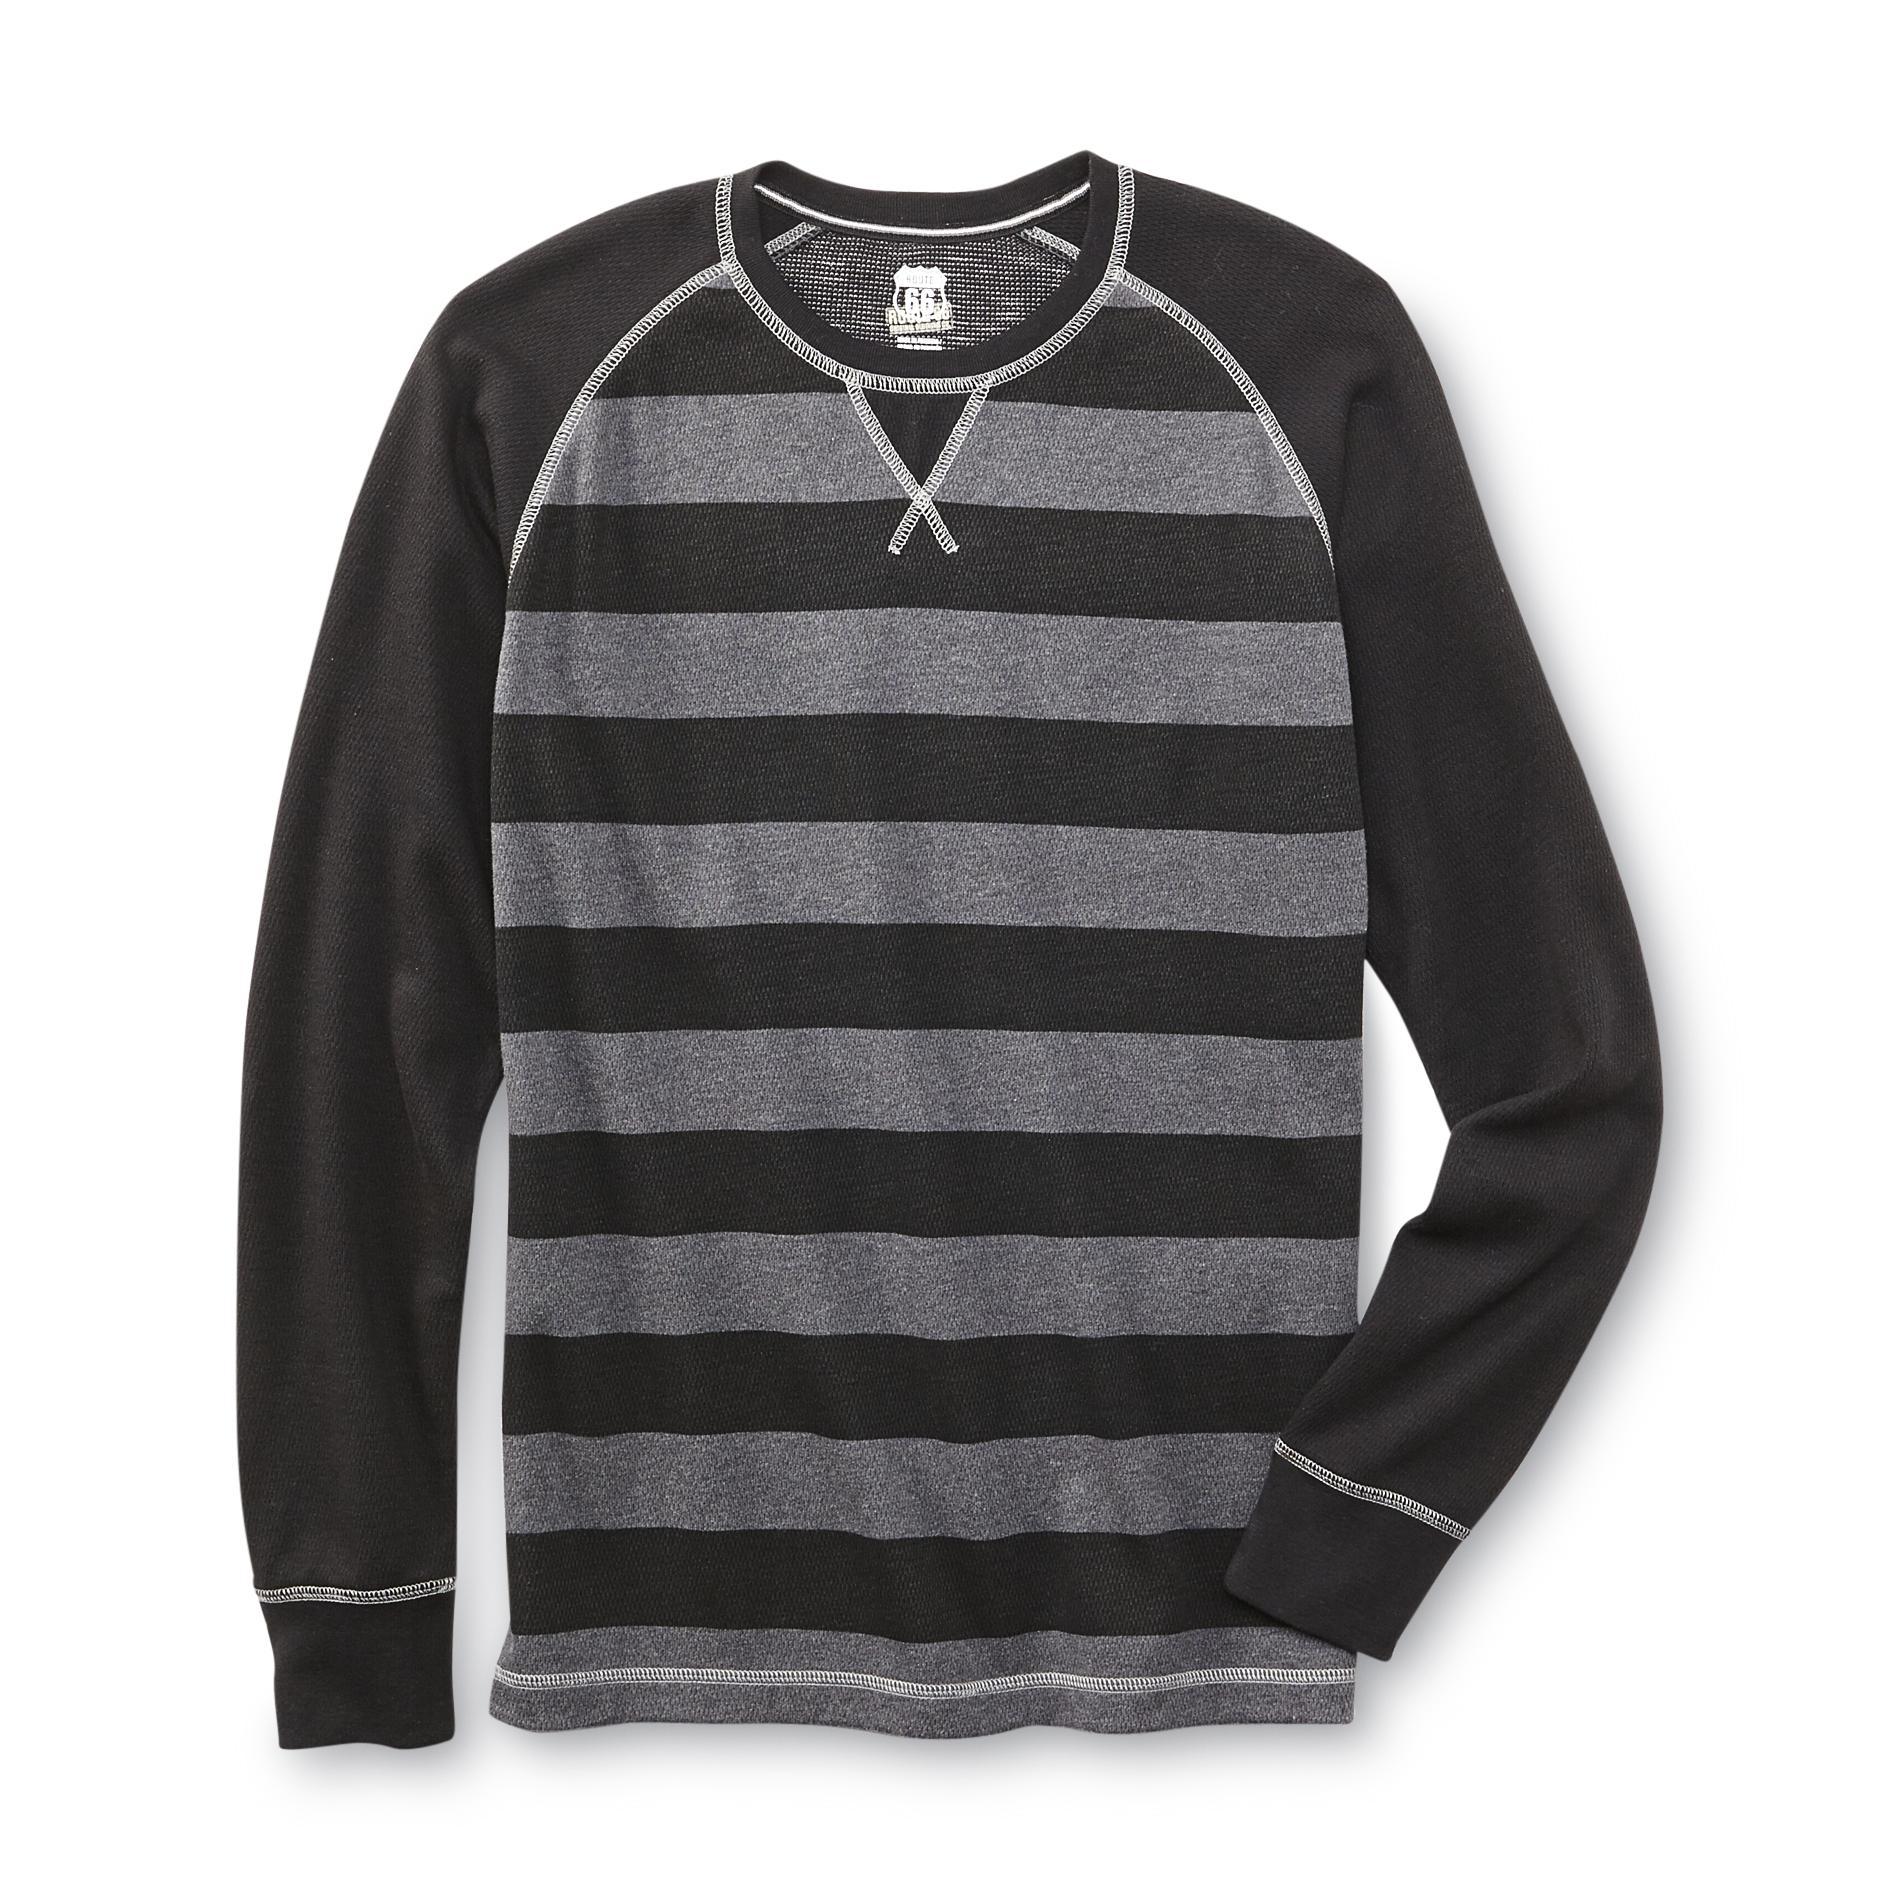 Route 66 Men's Thermal Raglan Shirt - Rugby Striped